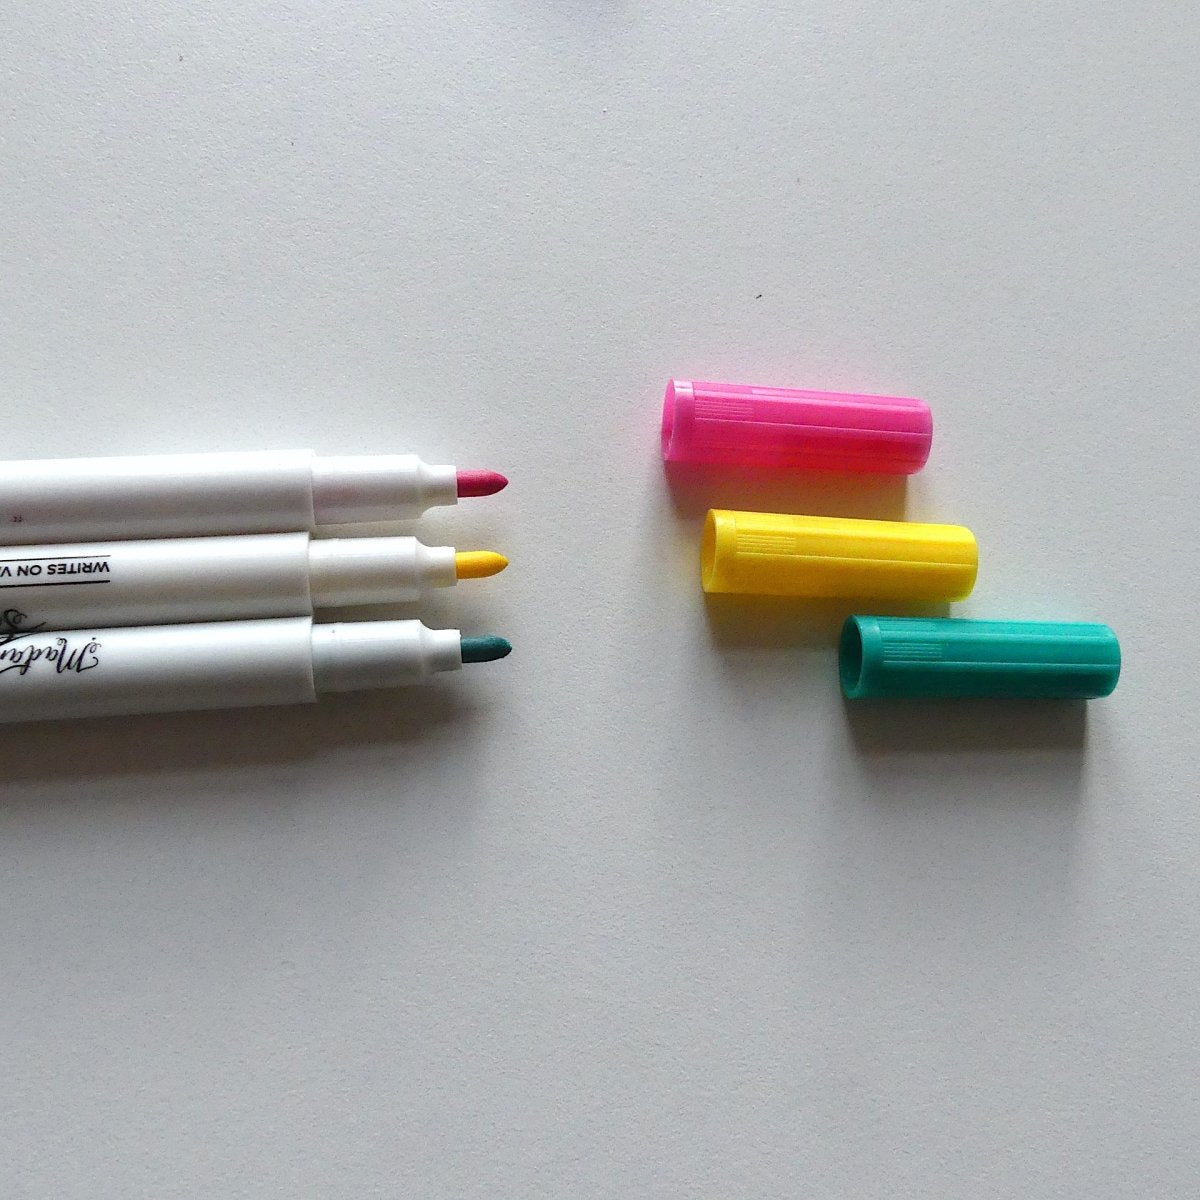 3 colors of Madam Sew permanent markers to draw on fabric